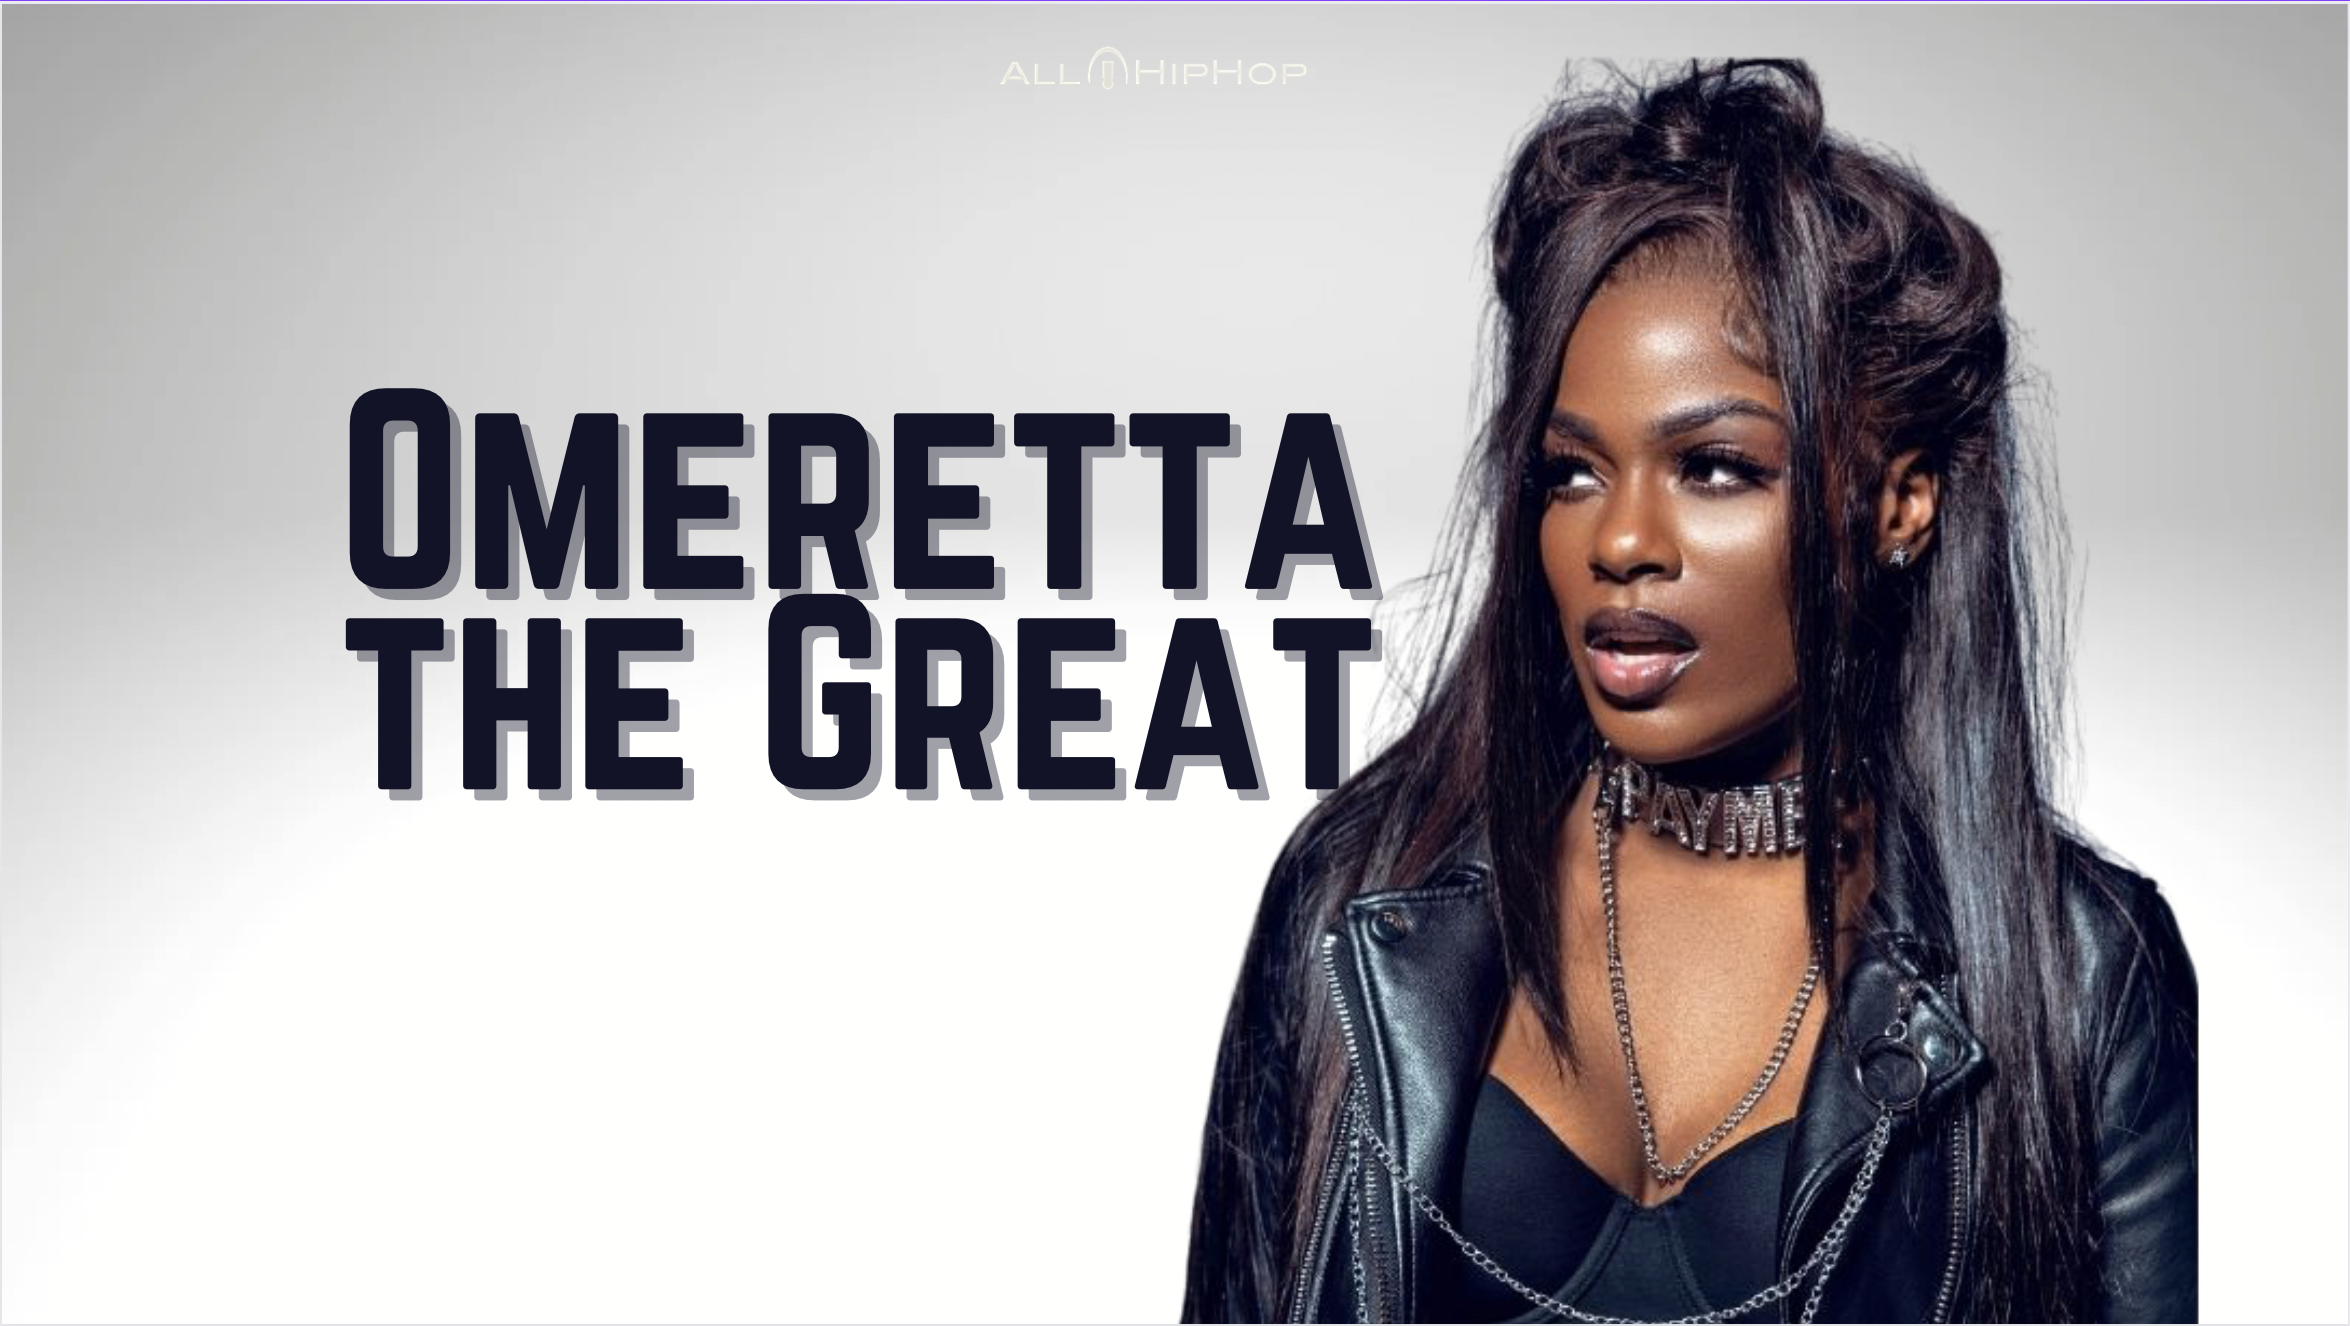 Omeretta the Great